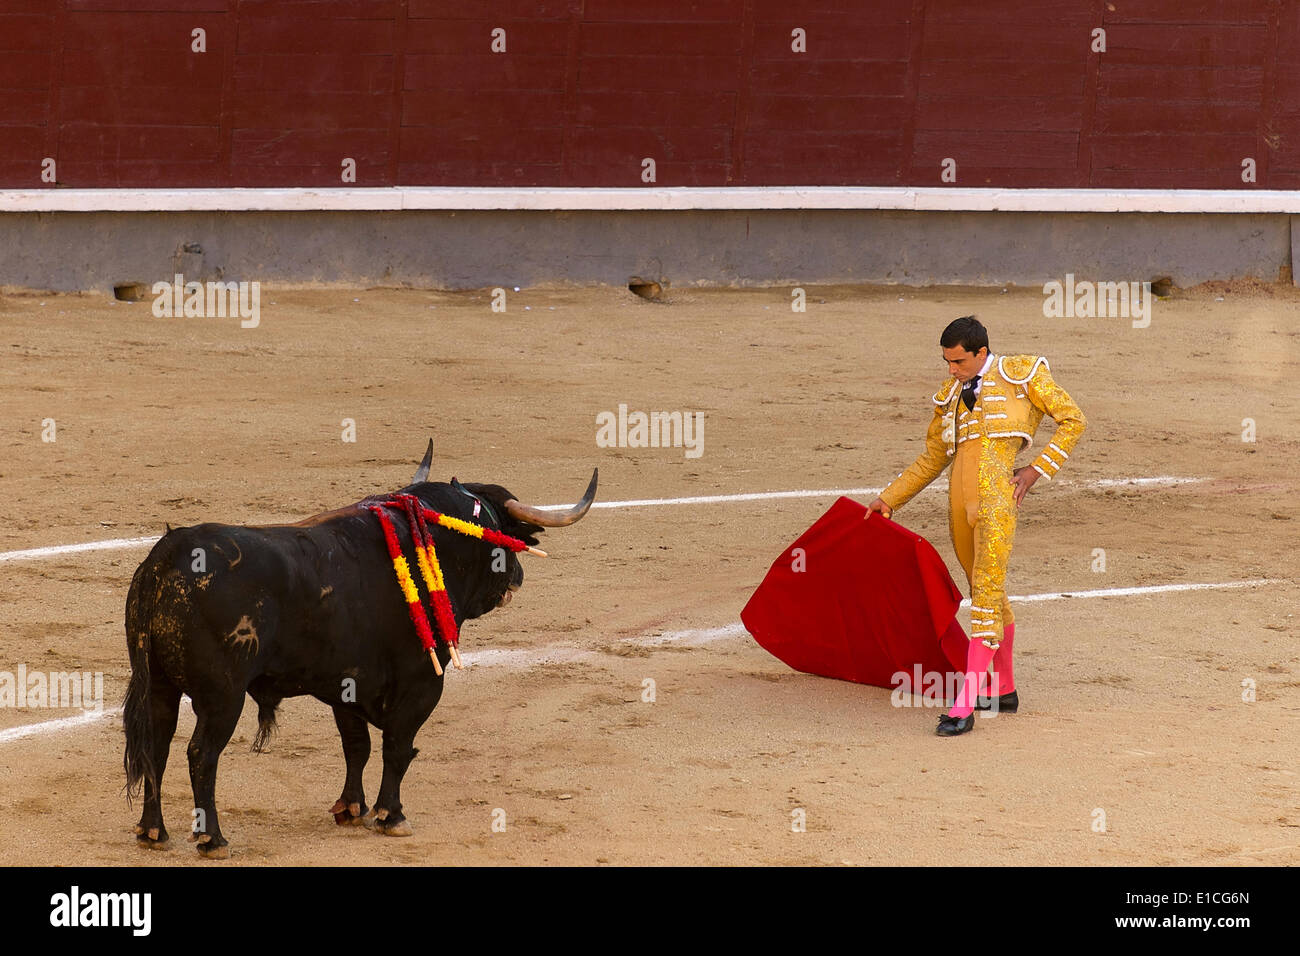 Madrid, Spain. 30th May 2014. Action taking place during the bullfighting in Las Ventas, in Madrid, with Paco Ureña bullfighter, Spain, May 30, 2014 Credit:  nacroba/Alamy Live News Stock Photo